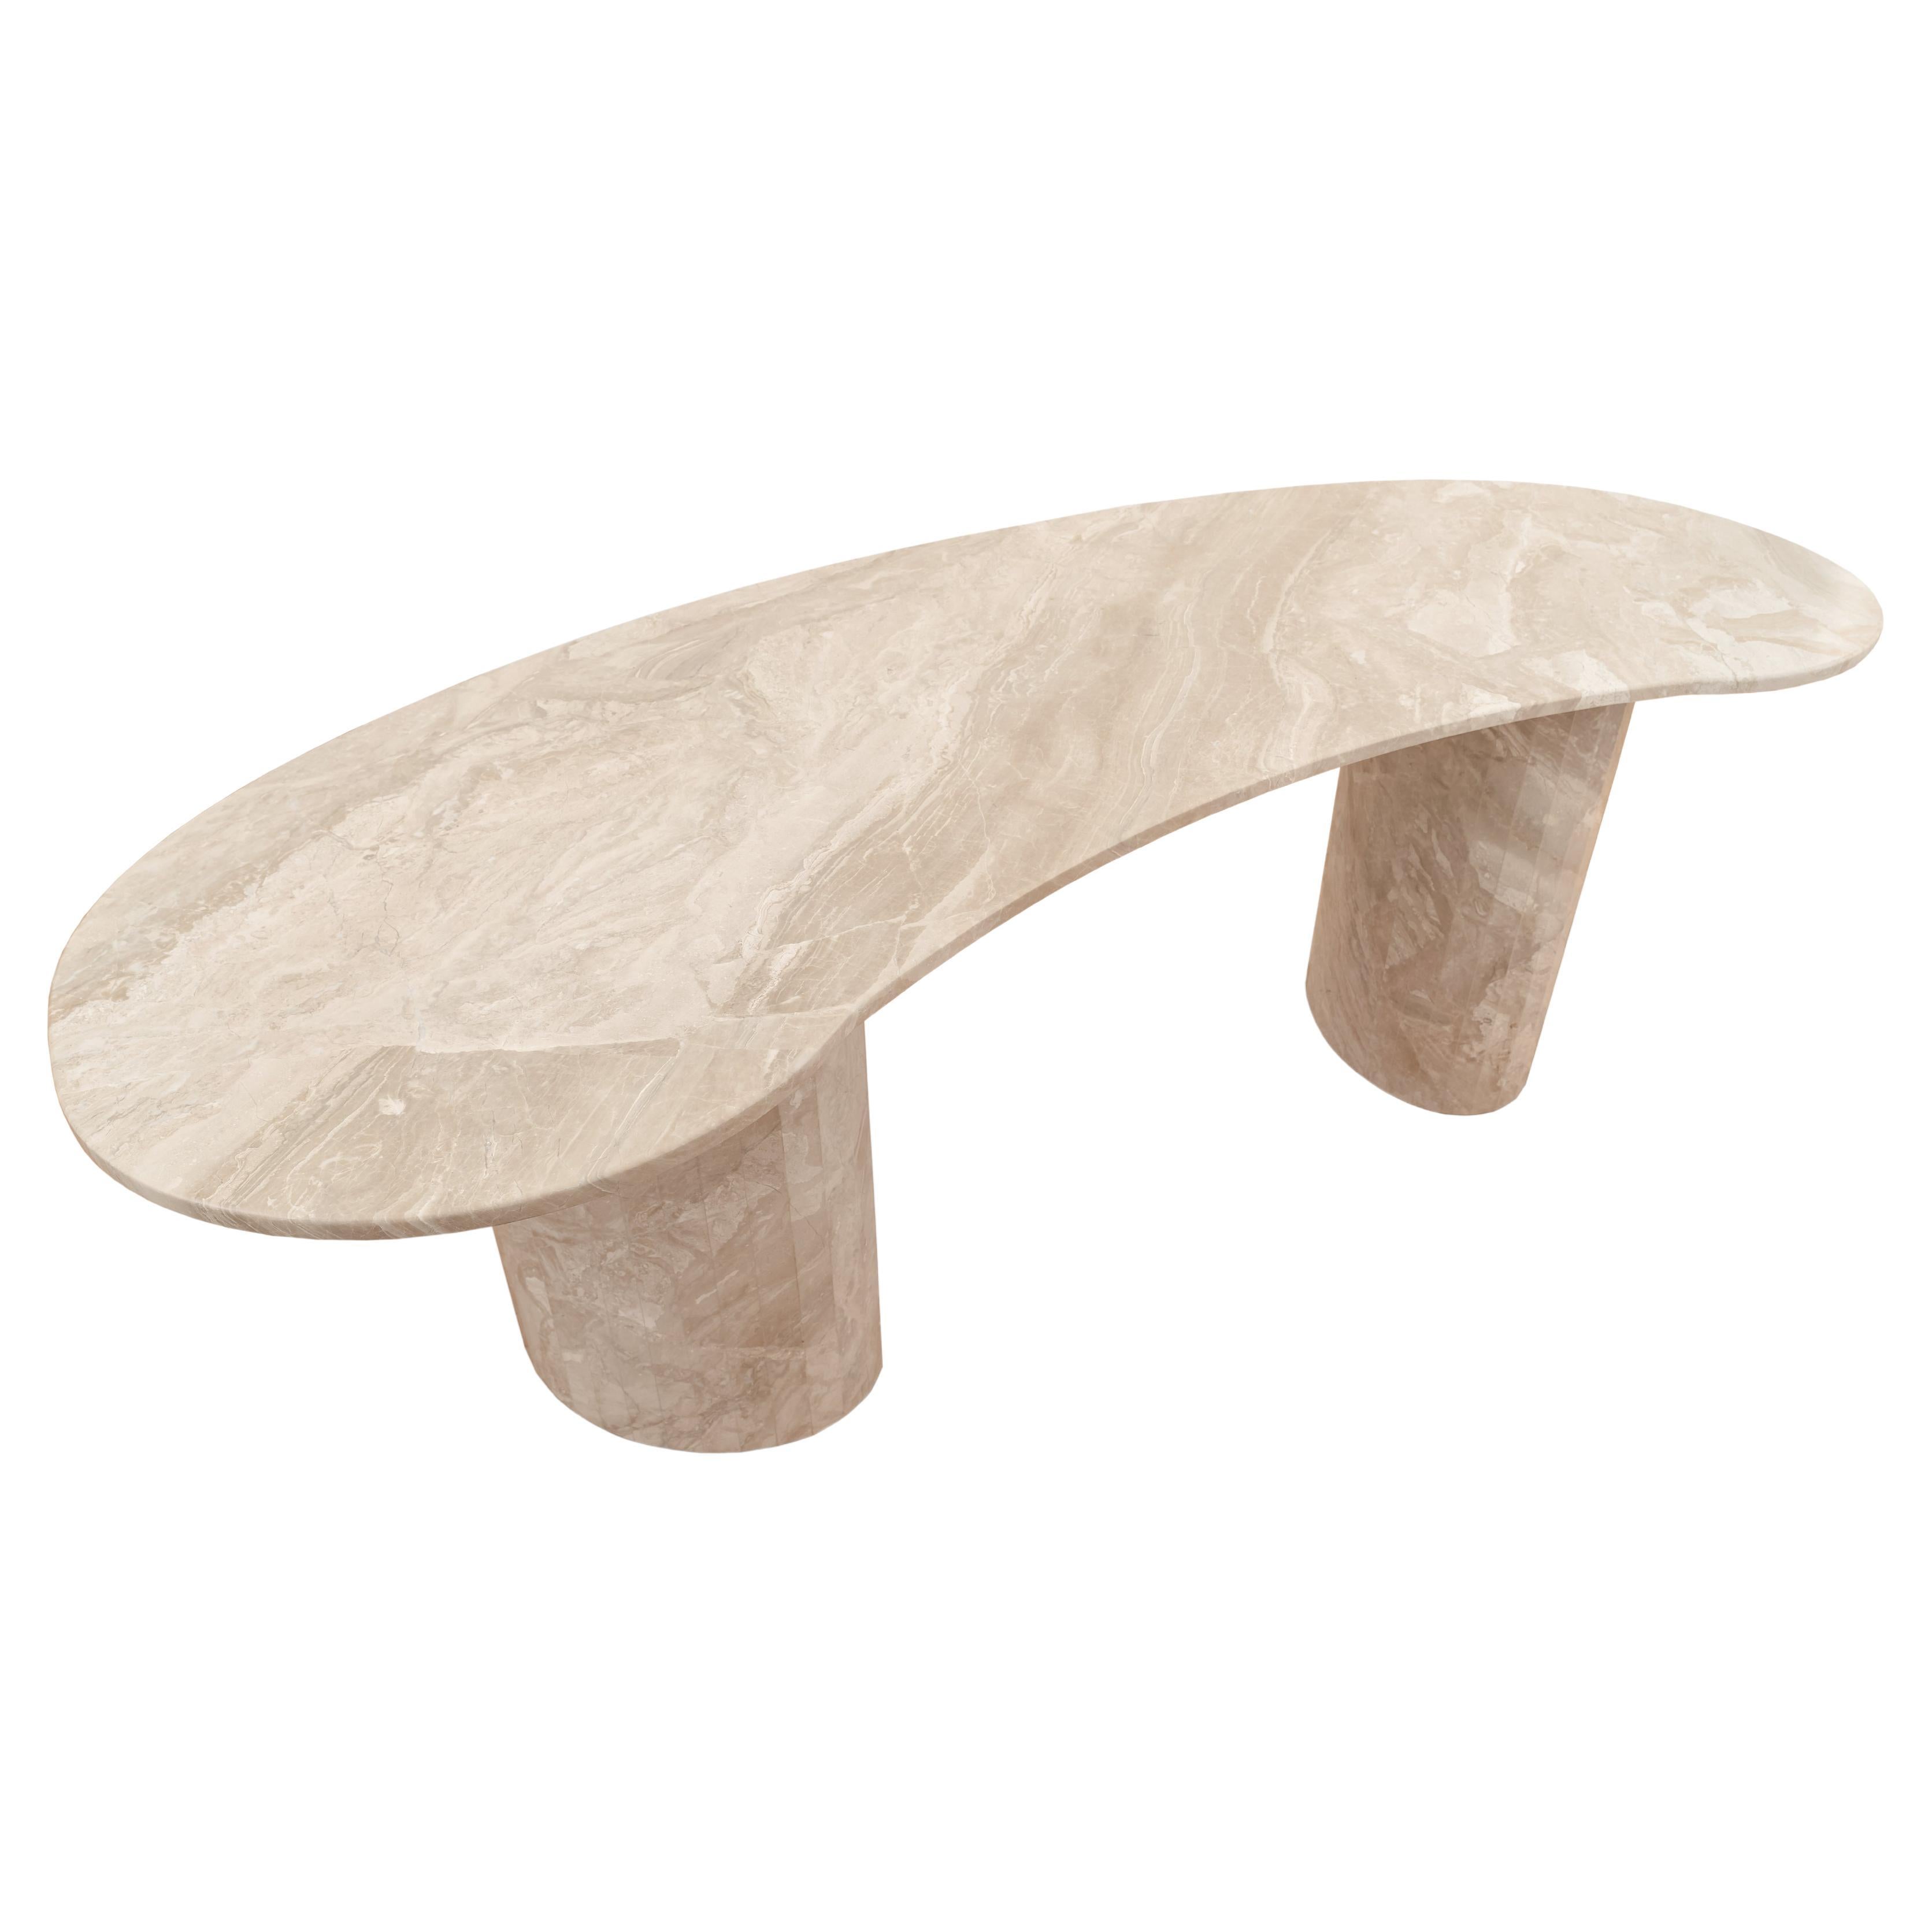 Sinuo Marble Dining Table by STUDIO IB MILANO